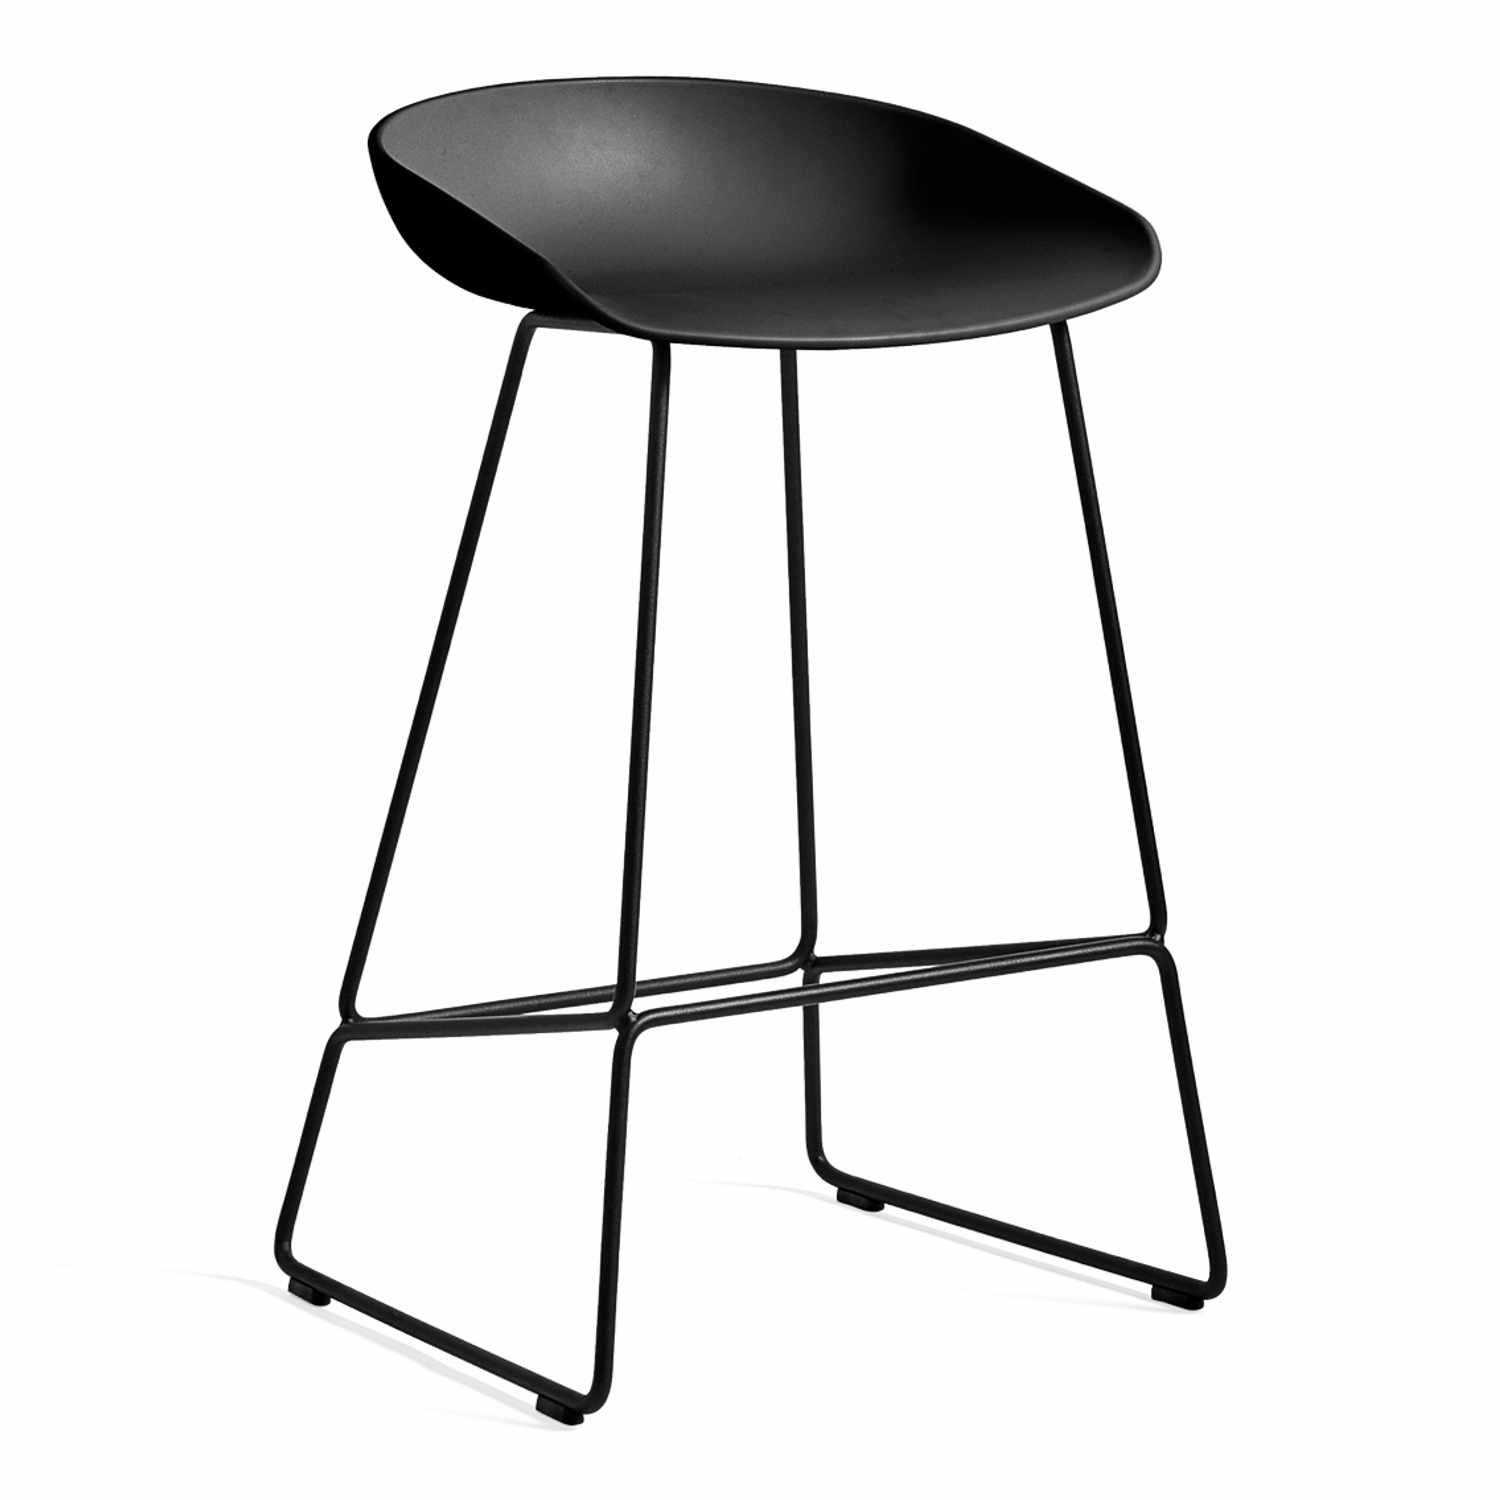 About a Stool AAS38 Low Barstuhl, Sitz Polypropylen dusty blue 2.0 (recycled), Untergestell stahl, chrom von Hay